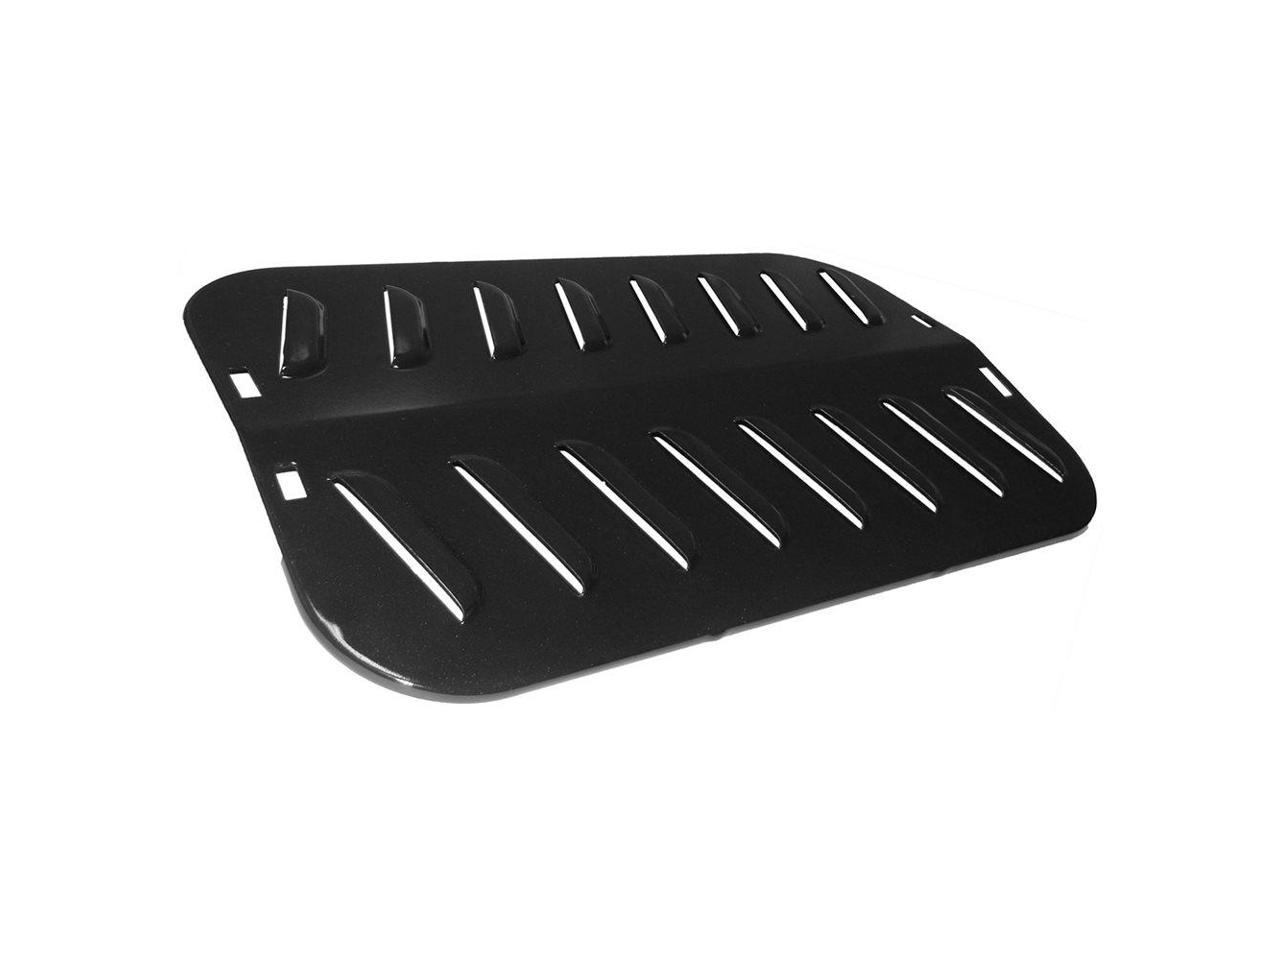 93031 Gas Grill Porcelain Steel Heat Plate for Coleman & Others 